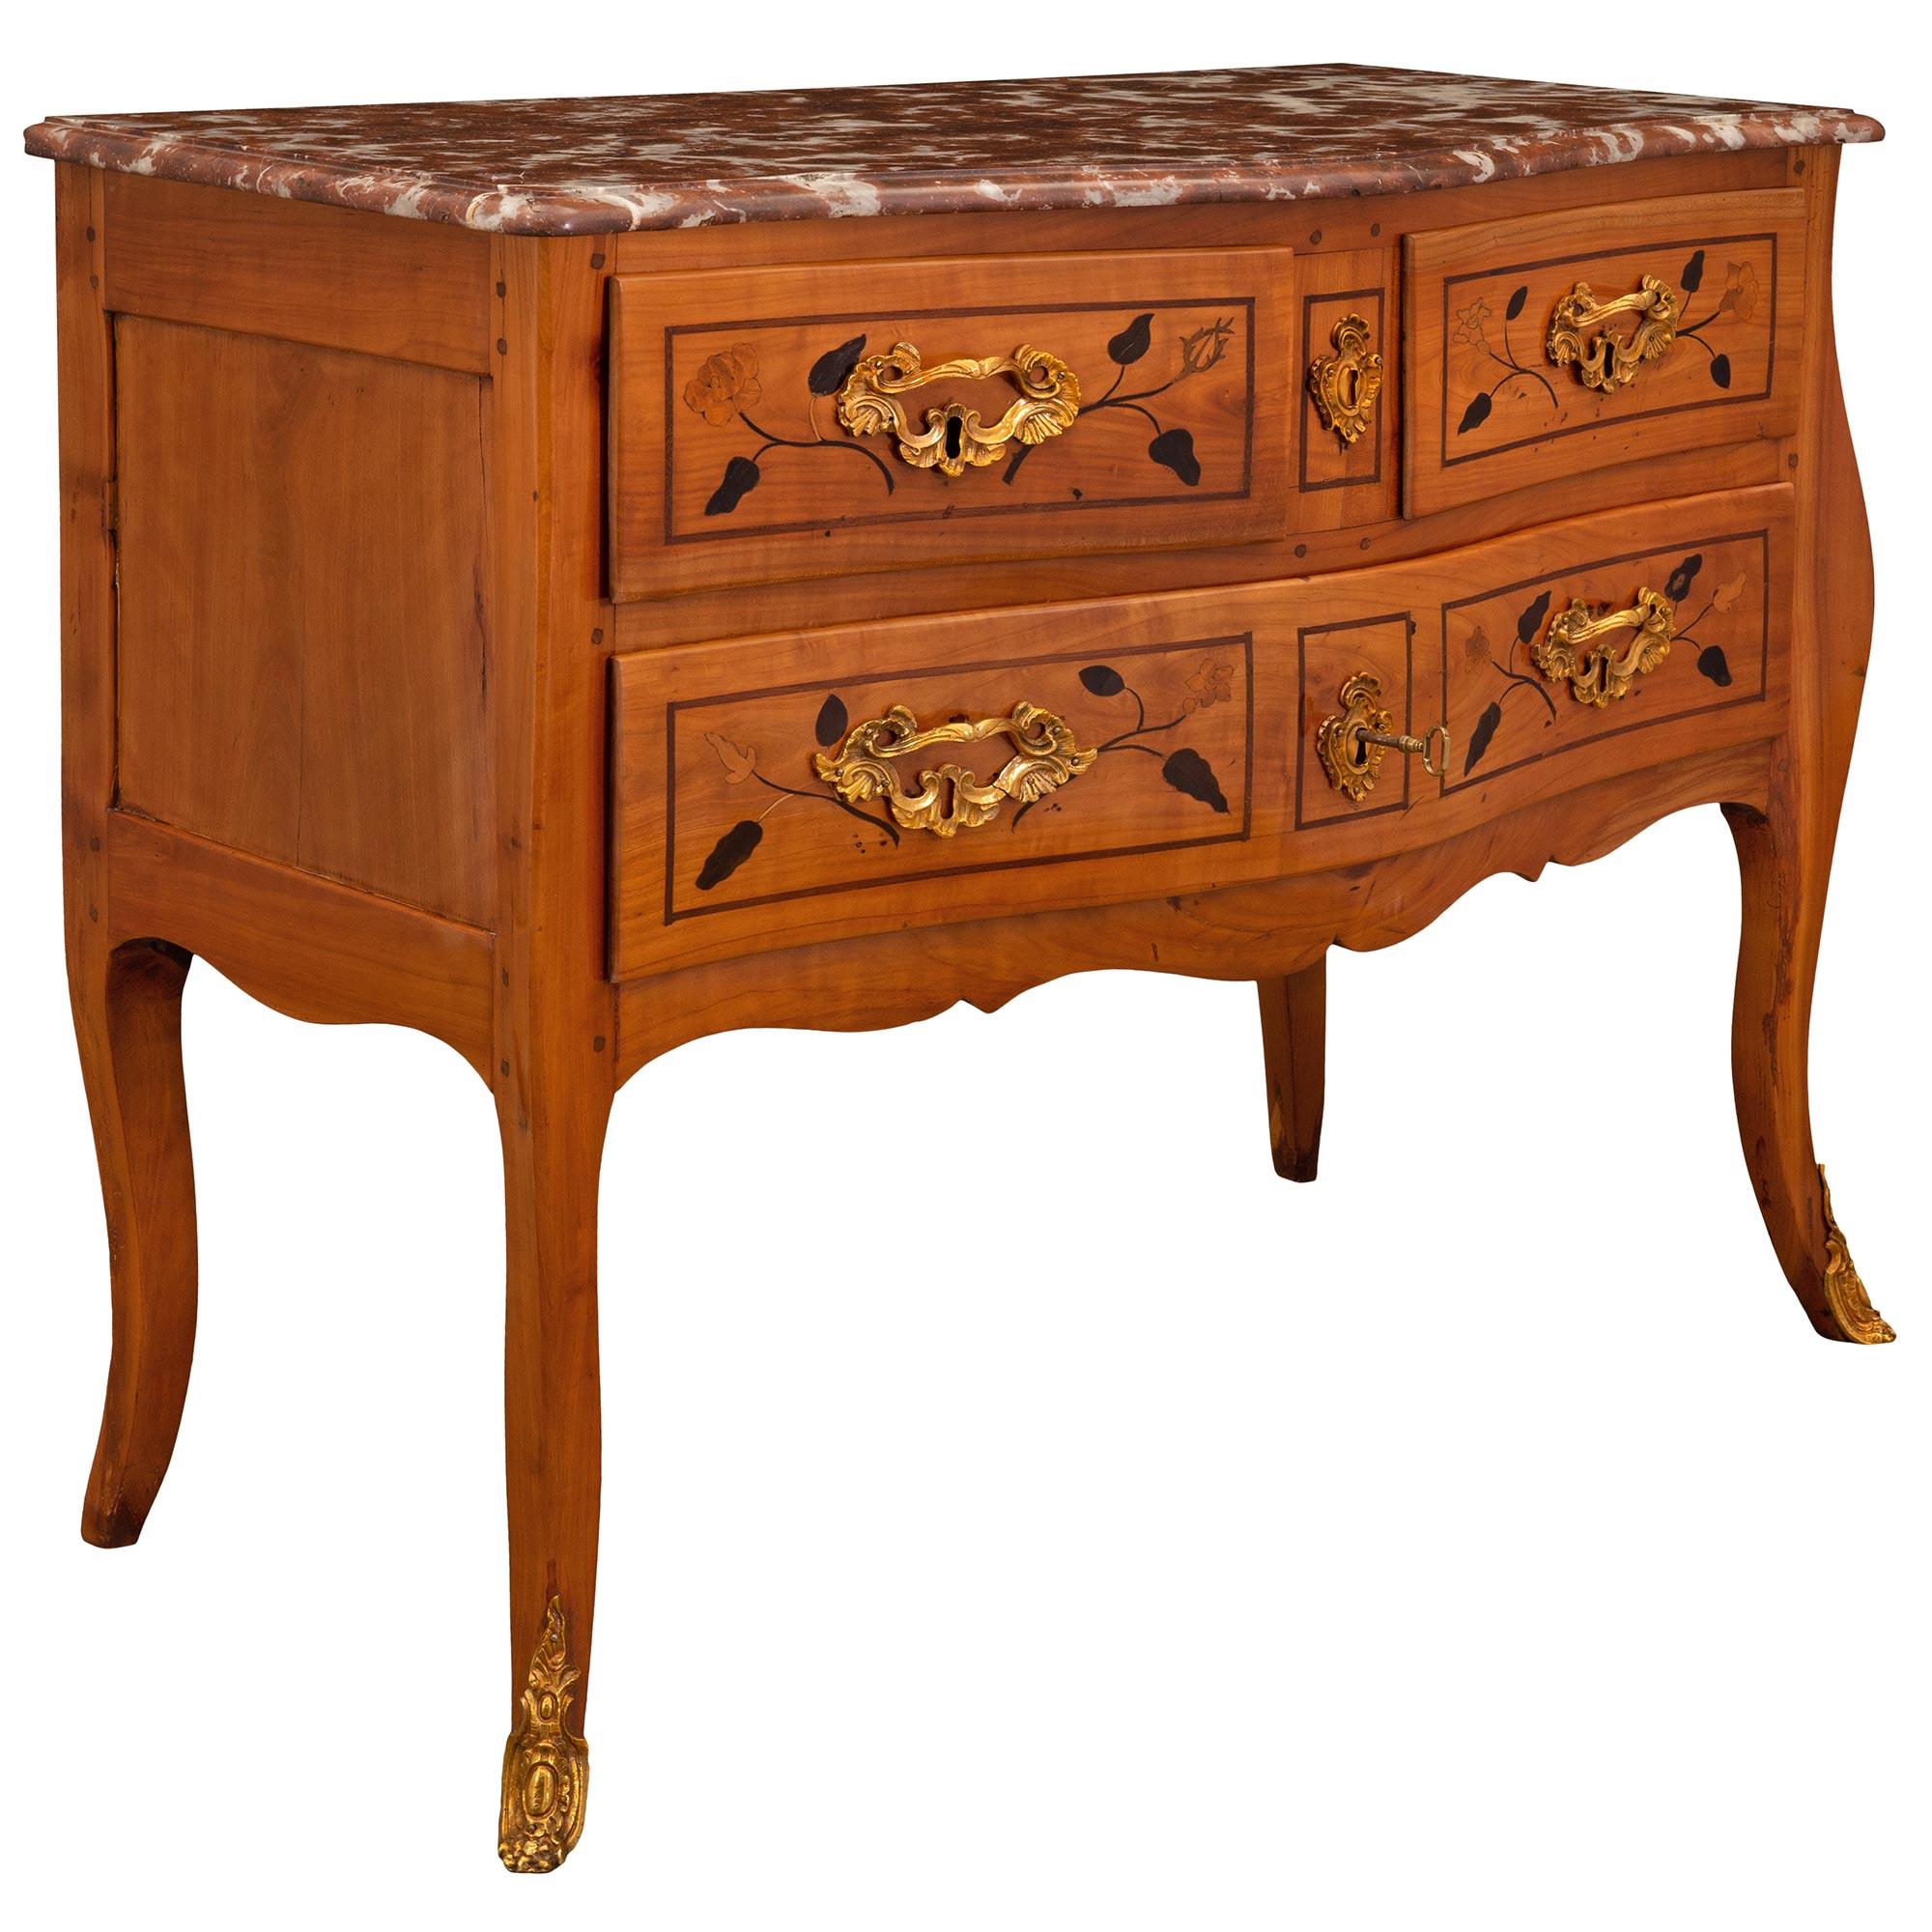 French 18th Century Louis XV Period Three-Drawer Bombee Shaped Commode In Good Condition For Sale In West Palm Beach, FL